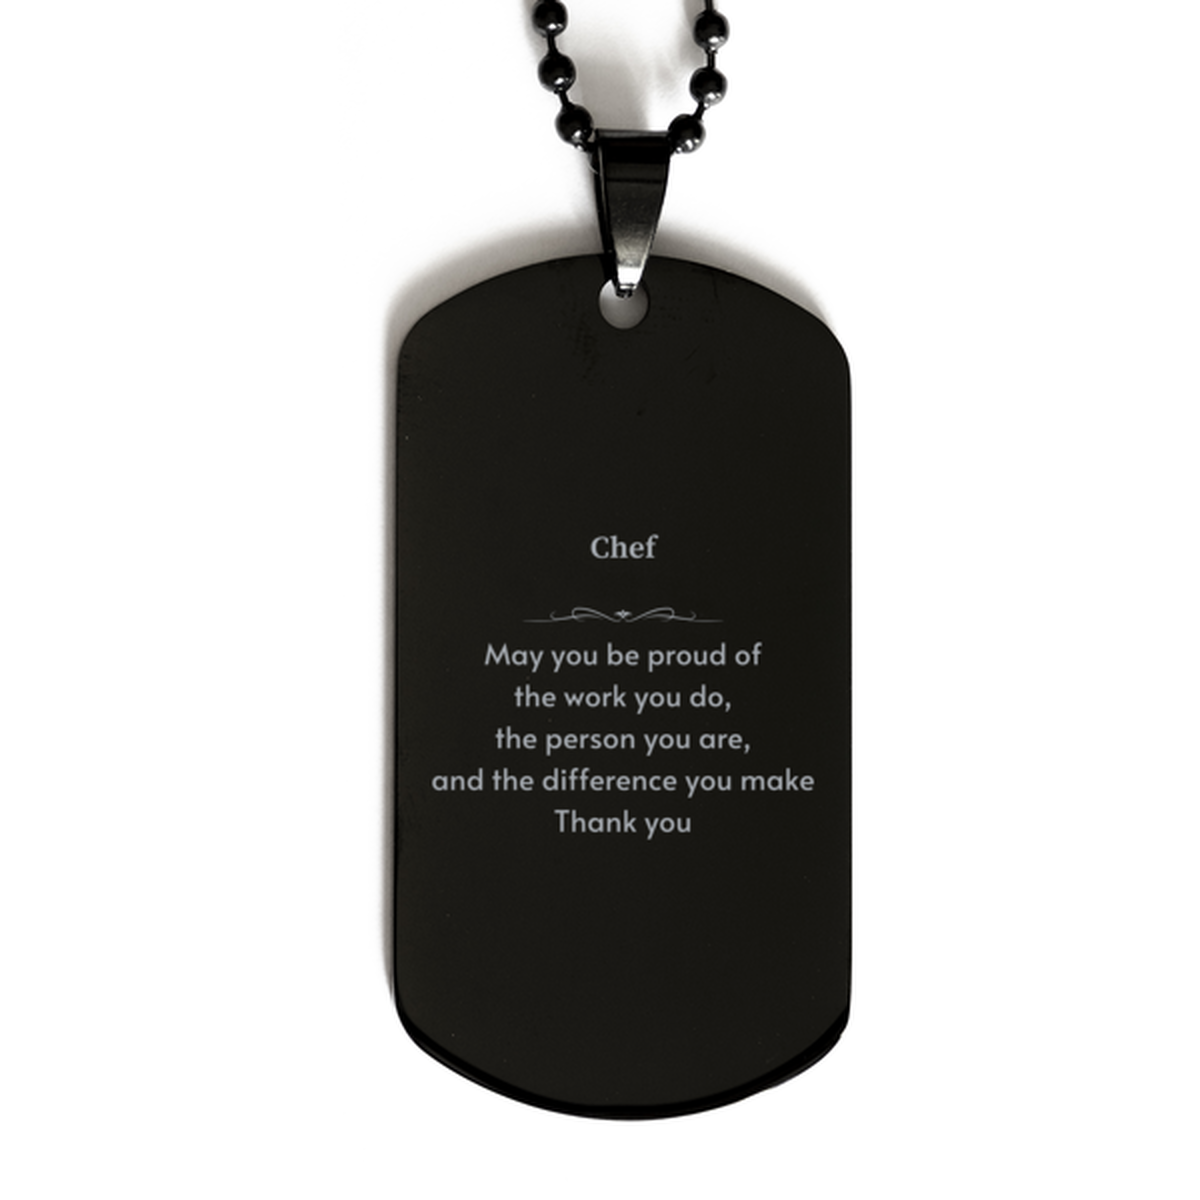 Heartwarming Black Dog Tag Retirement Coworkers Gifts for Chef, Chef May You be proud of the work you do, the person you are Gifts for Boss Men Women Friends